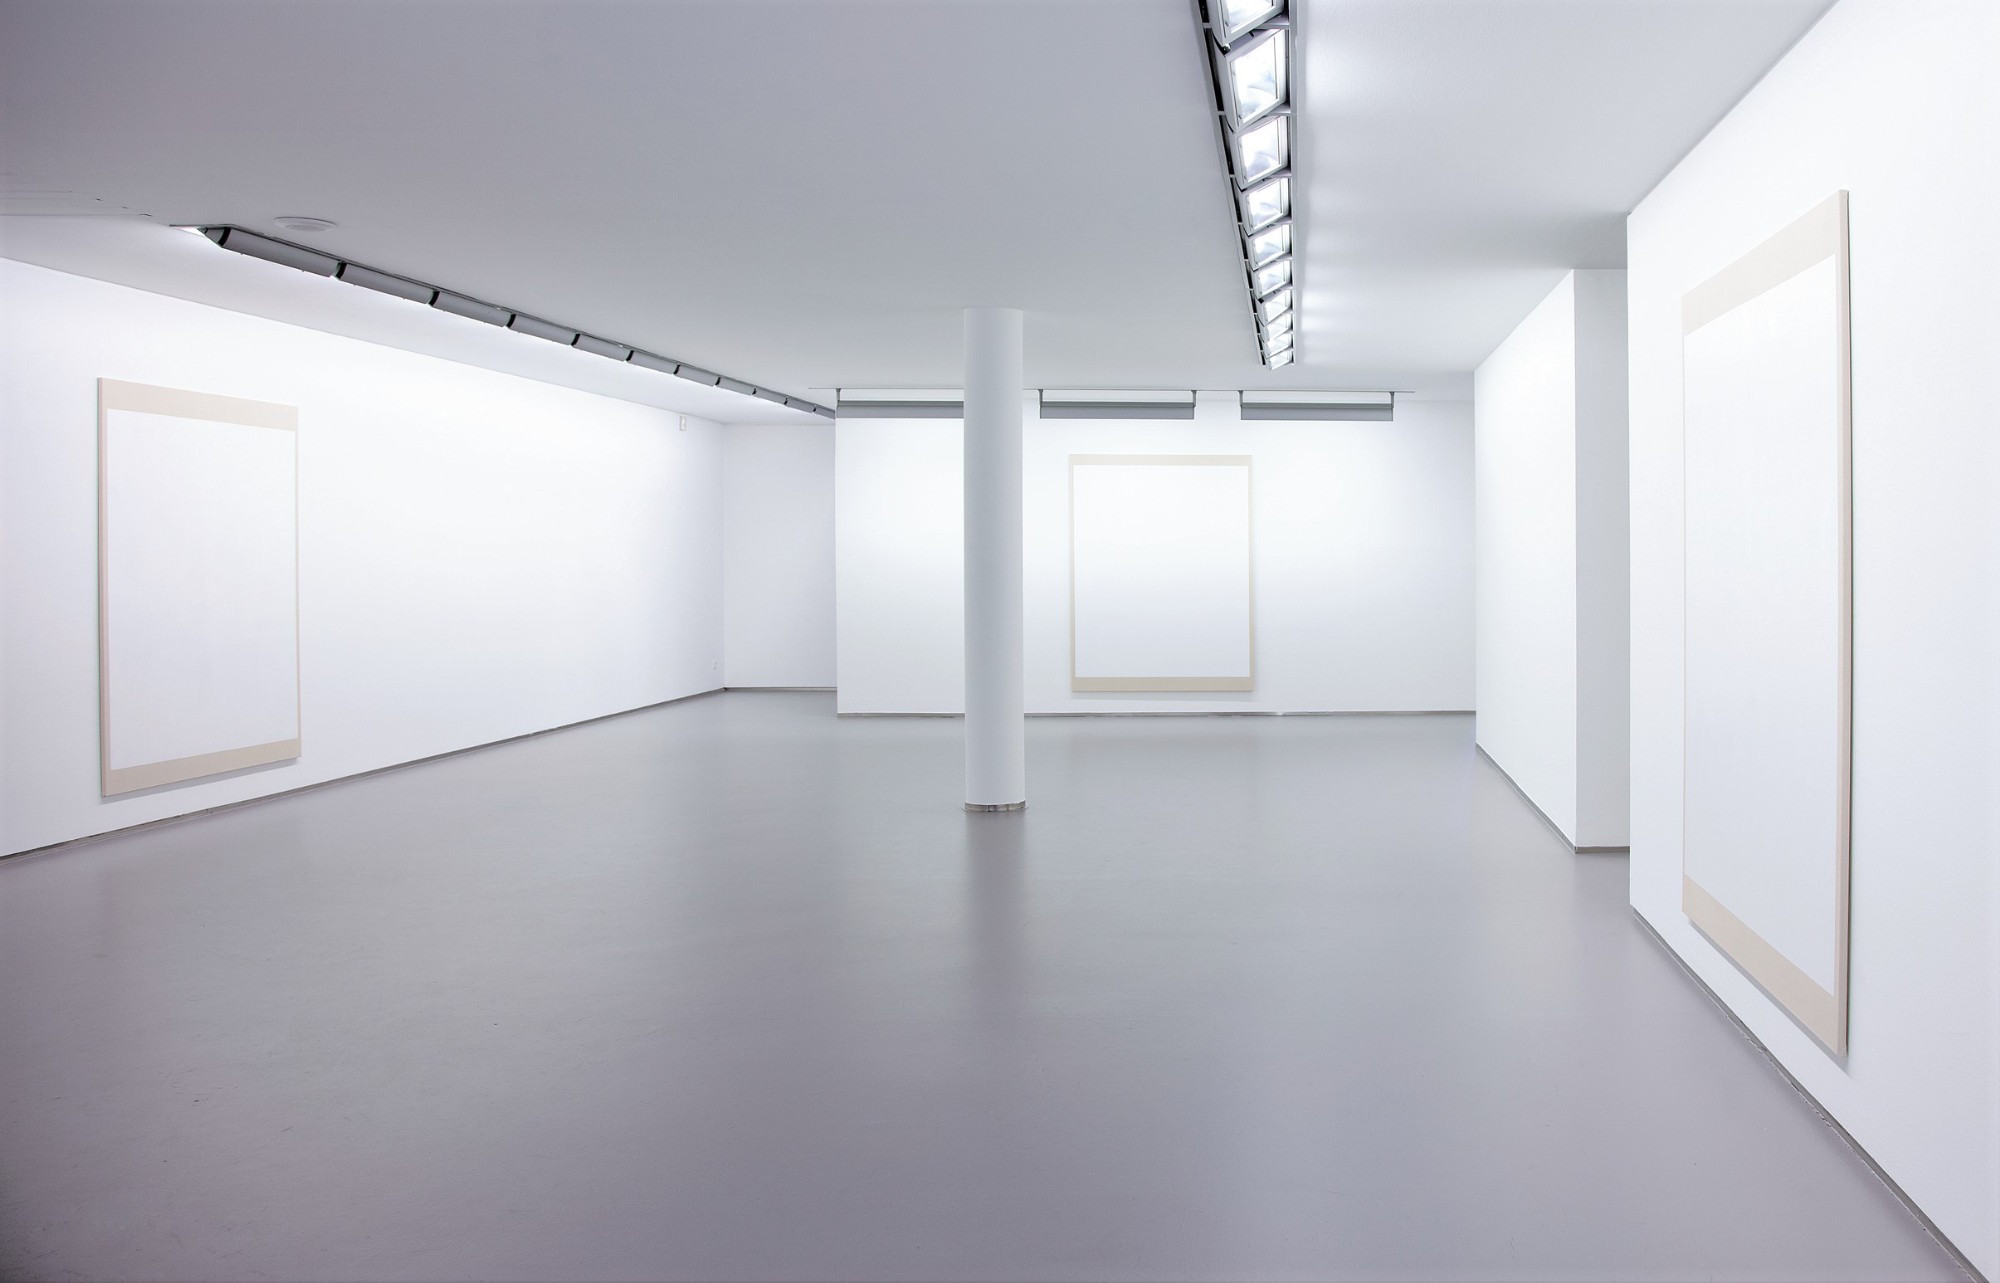 Holger Endres, Exhibition view, 2011